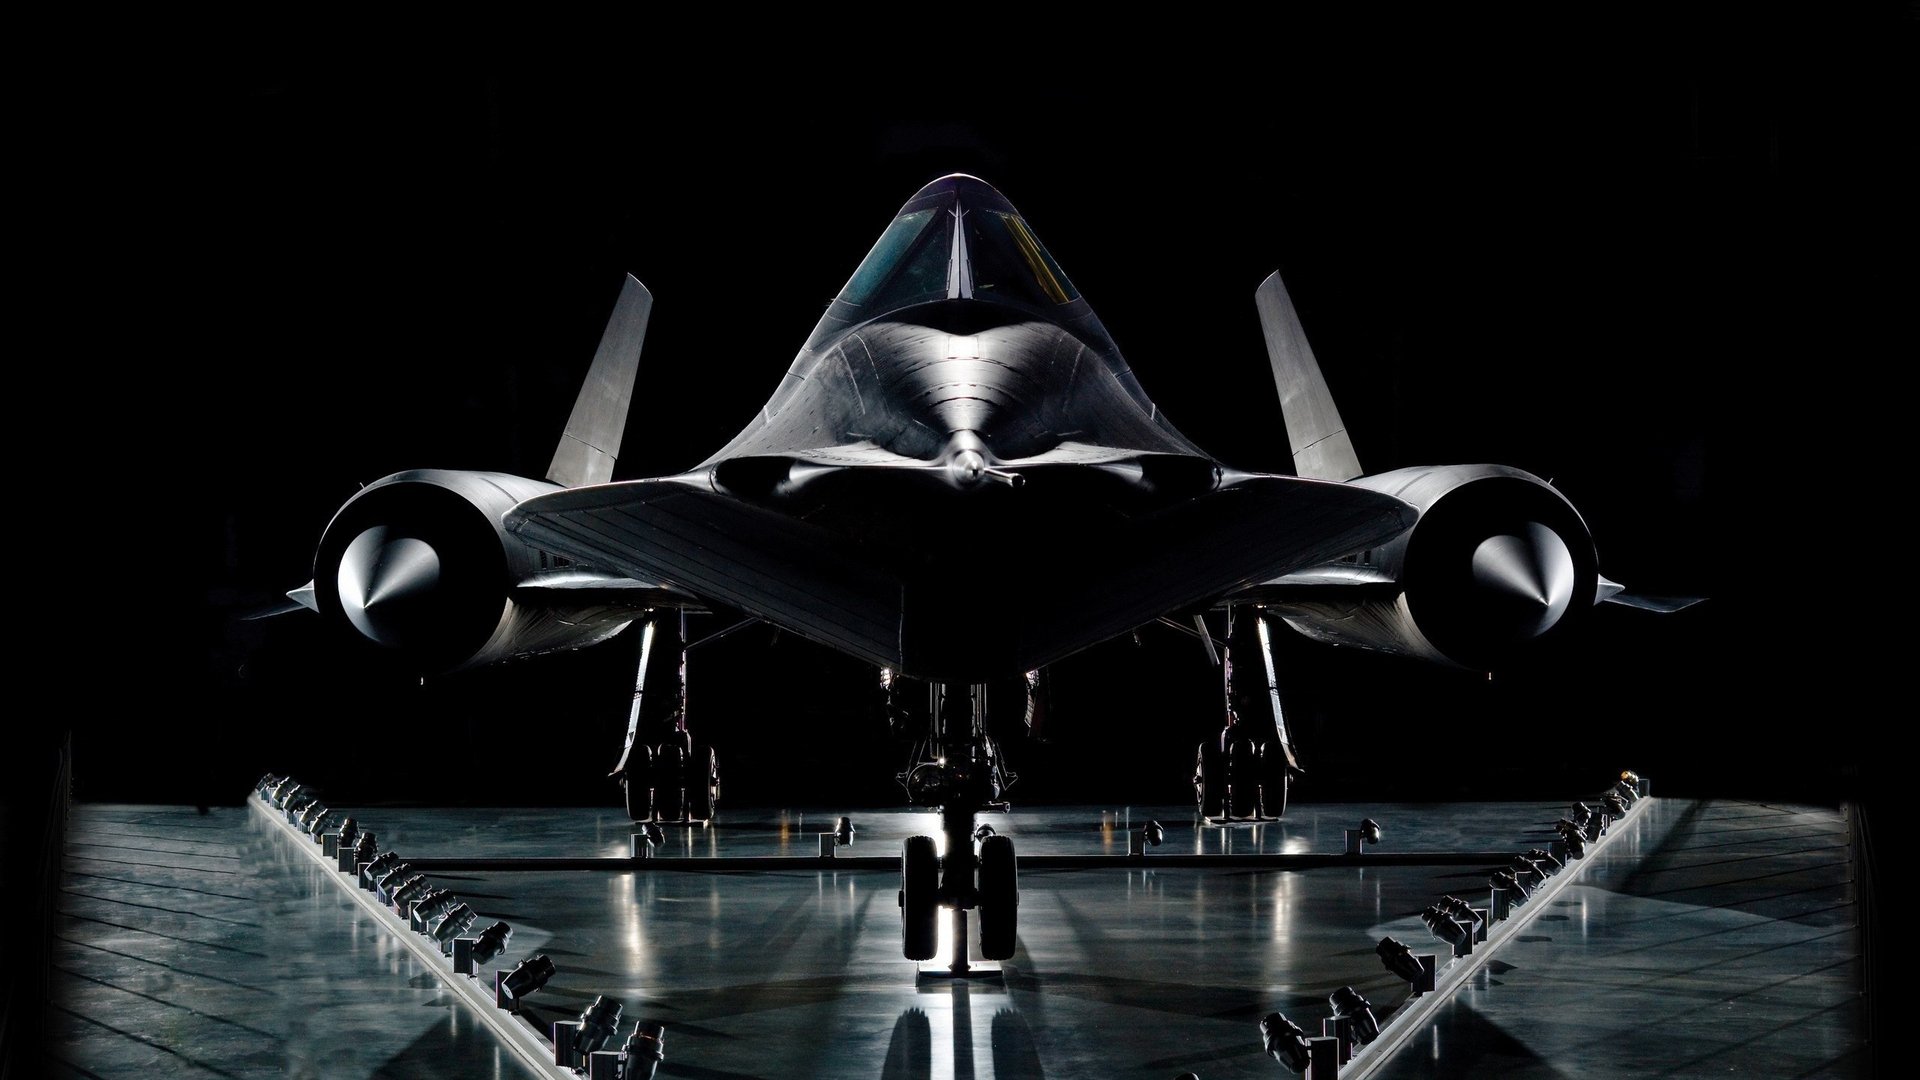 40+ Lockheed SR-71 Blackbird HD Wallpapers and Backgrounds